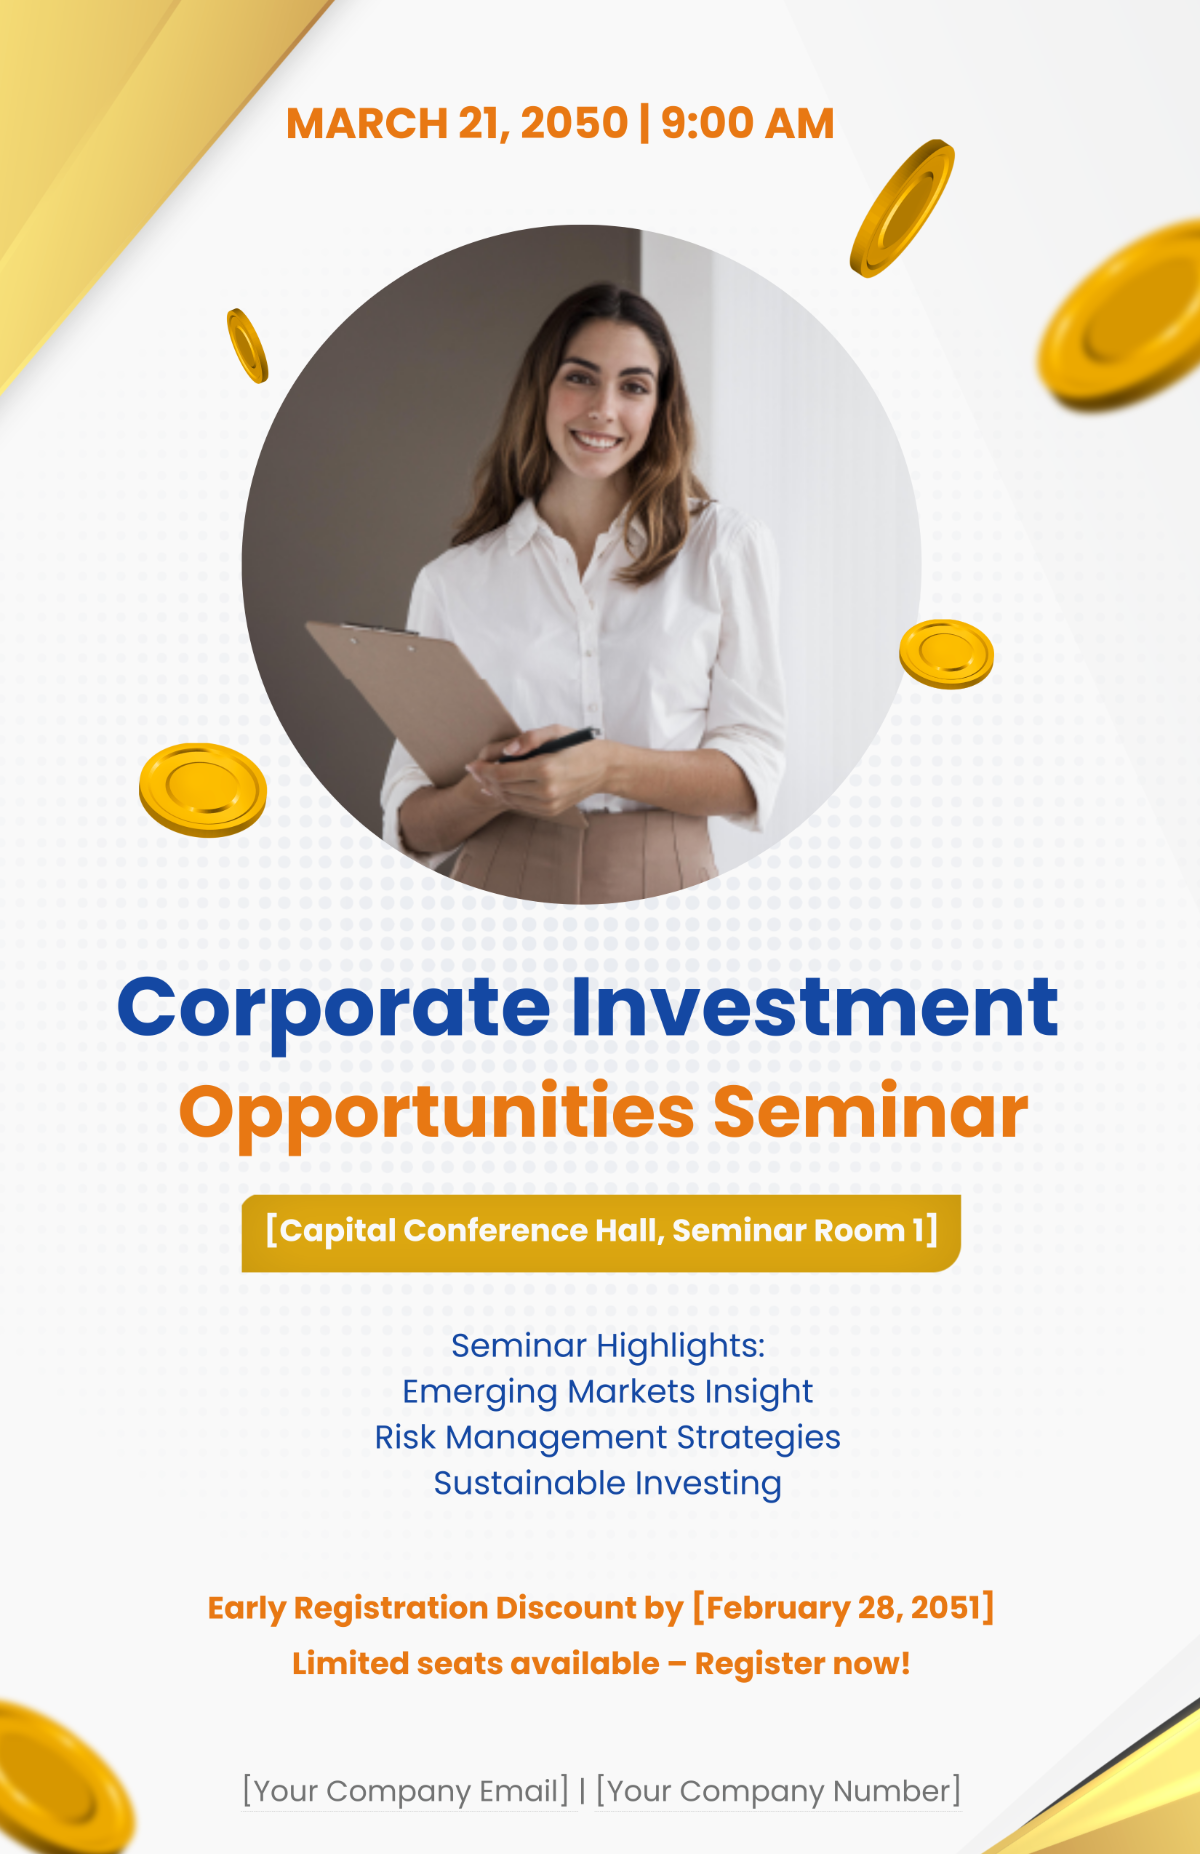 Corporate Investment Opportunities Seminar Poster Template